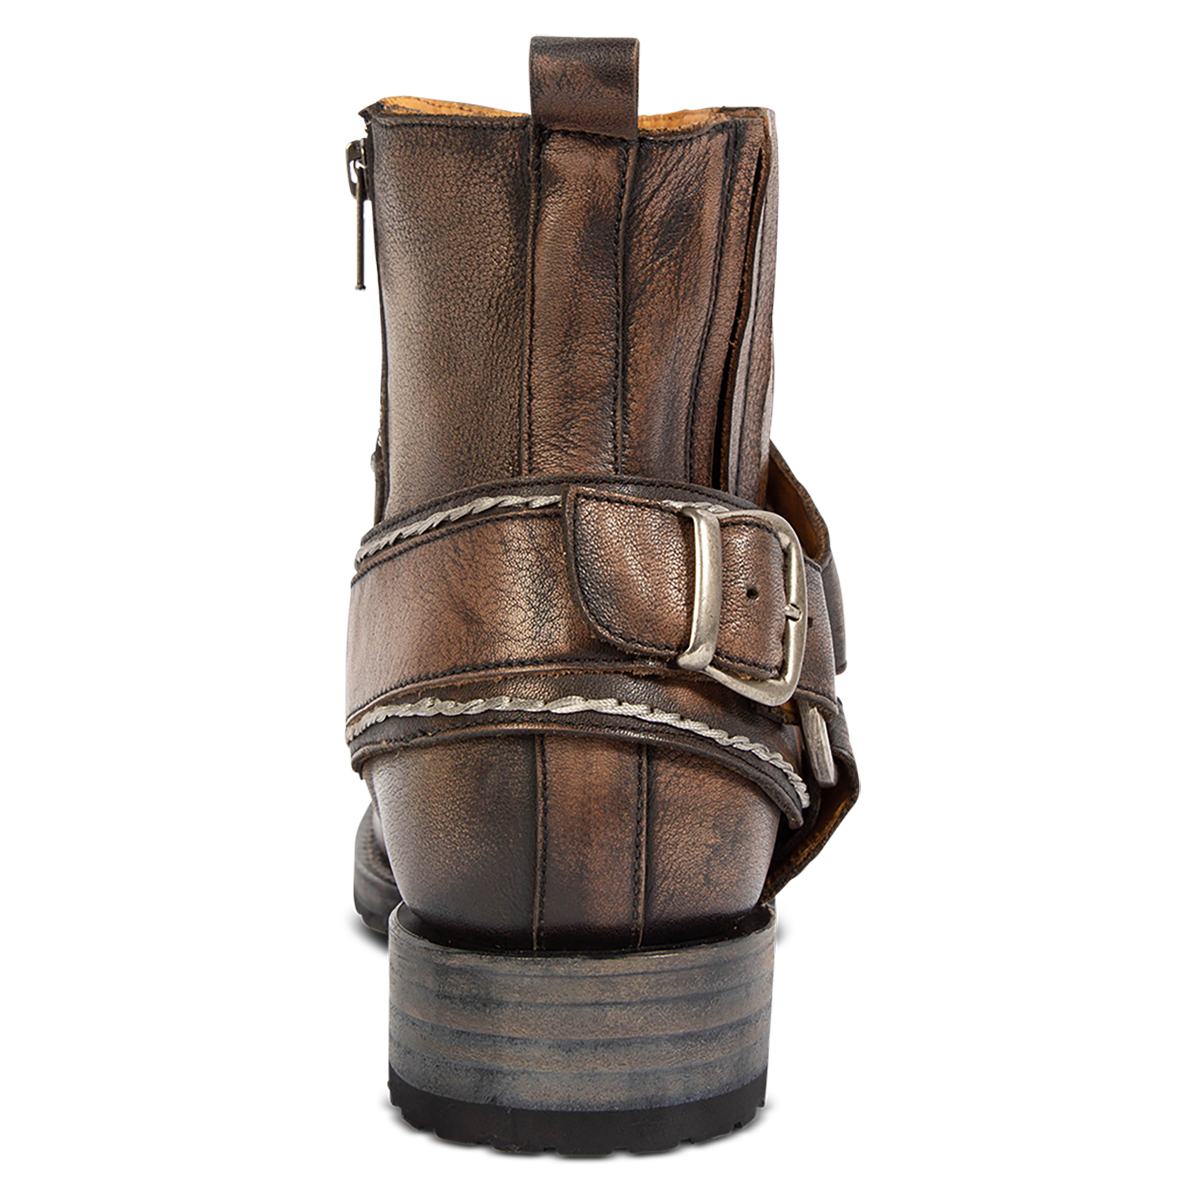 Back view showing a leather ankle harness strap, low heel and inside working brass zipper on FREEBIRD men's Dallas brown distressed leather boot 